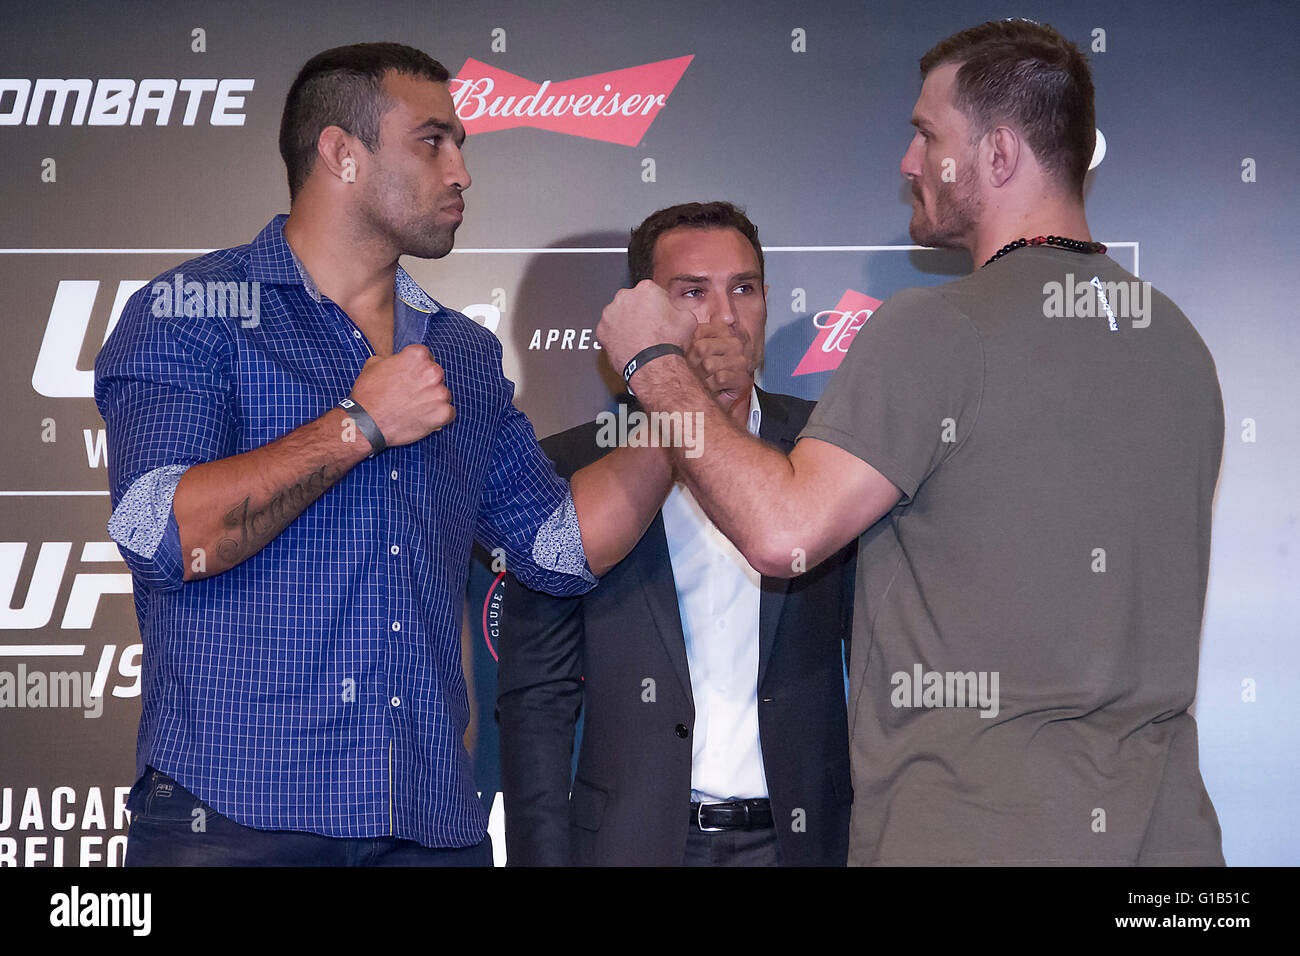 CURITIBA, PR - 12/05/2016: UFC 198 in Curitiba. Fabricio Werdum and Stipe Miocic compete for the heavyweight belt on Saturday, May 14, in Curitiba. With two days to the fights, UFC athletes gave interviews and posed for pictures. (Photo: William Artigas / FotoArena) Stock Photo